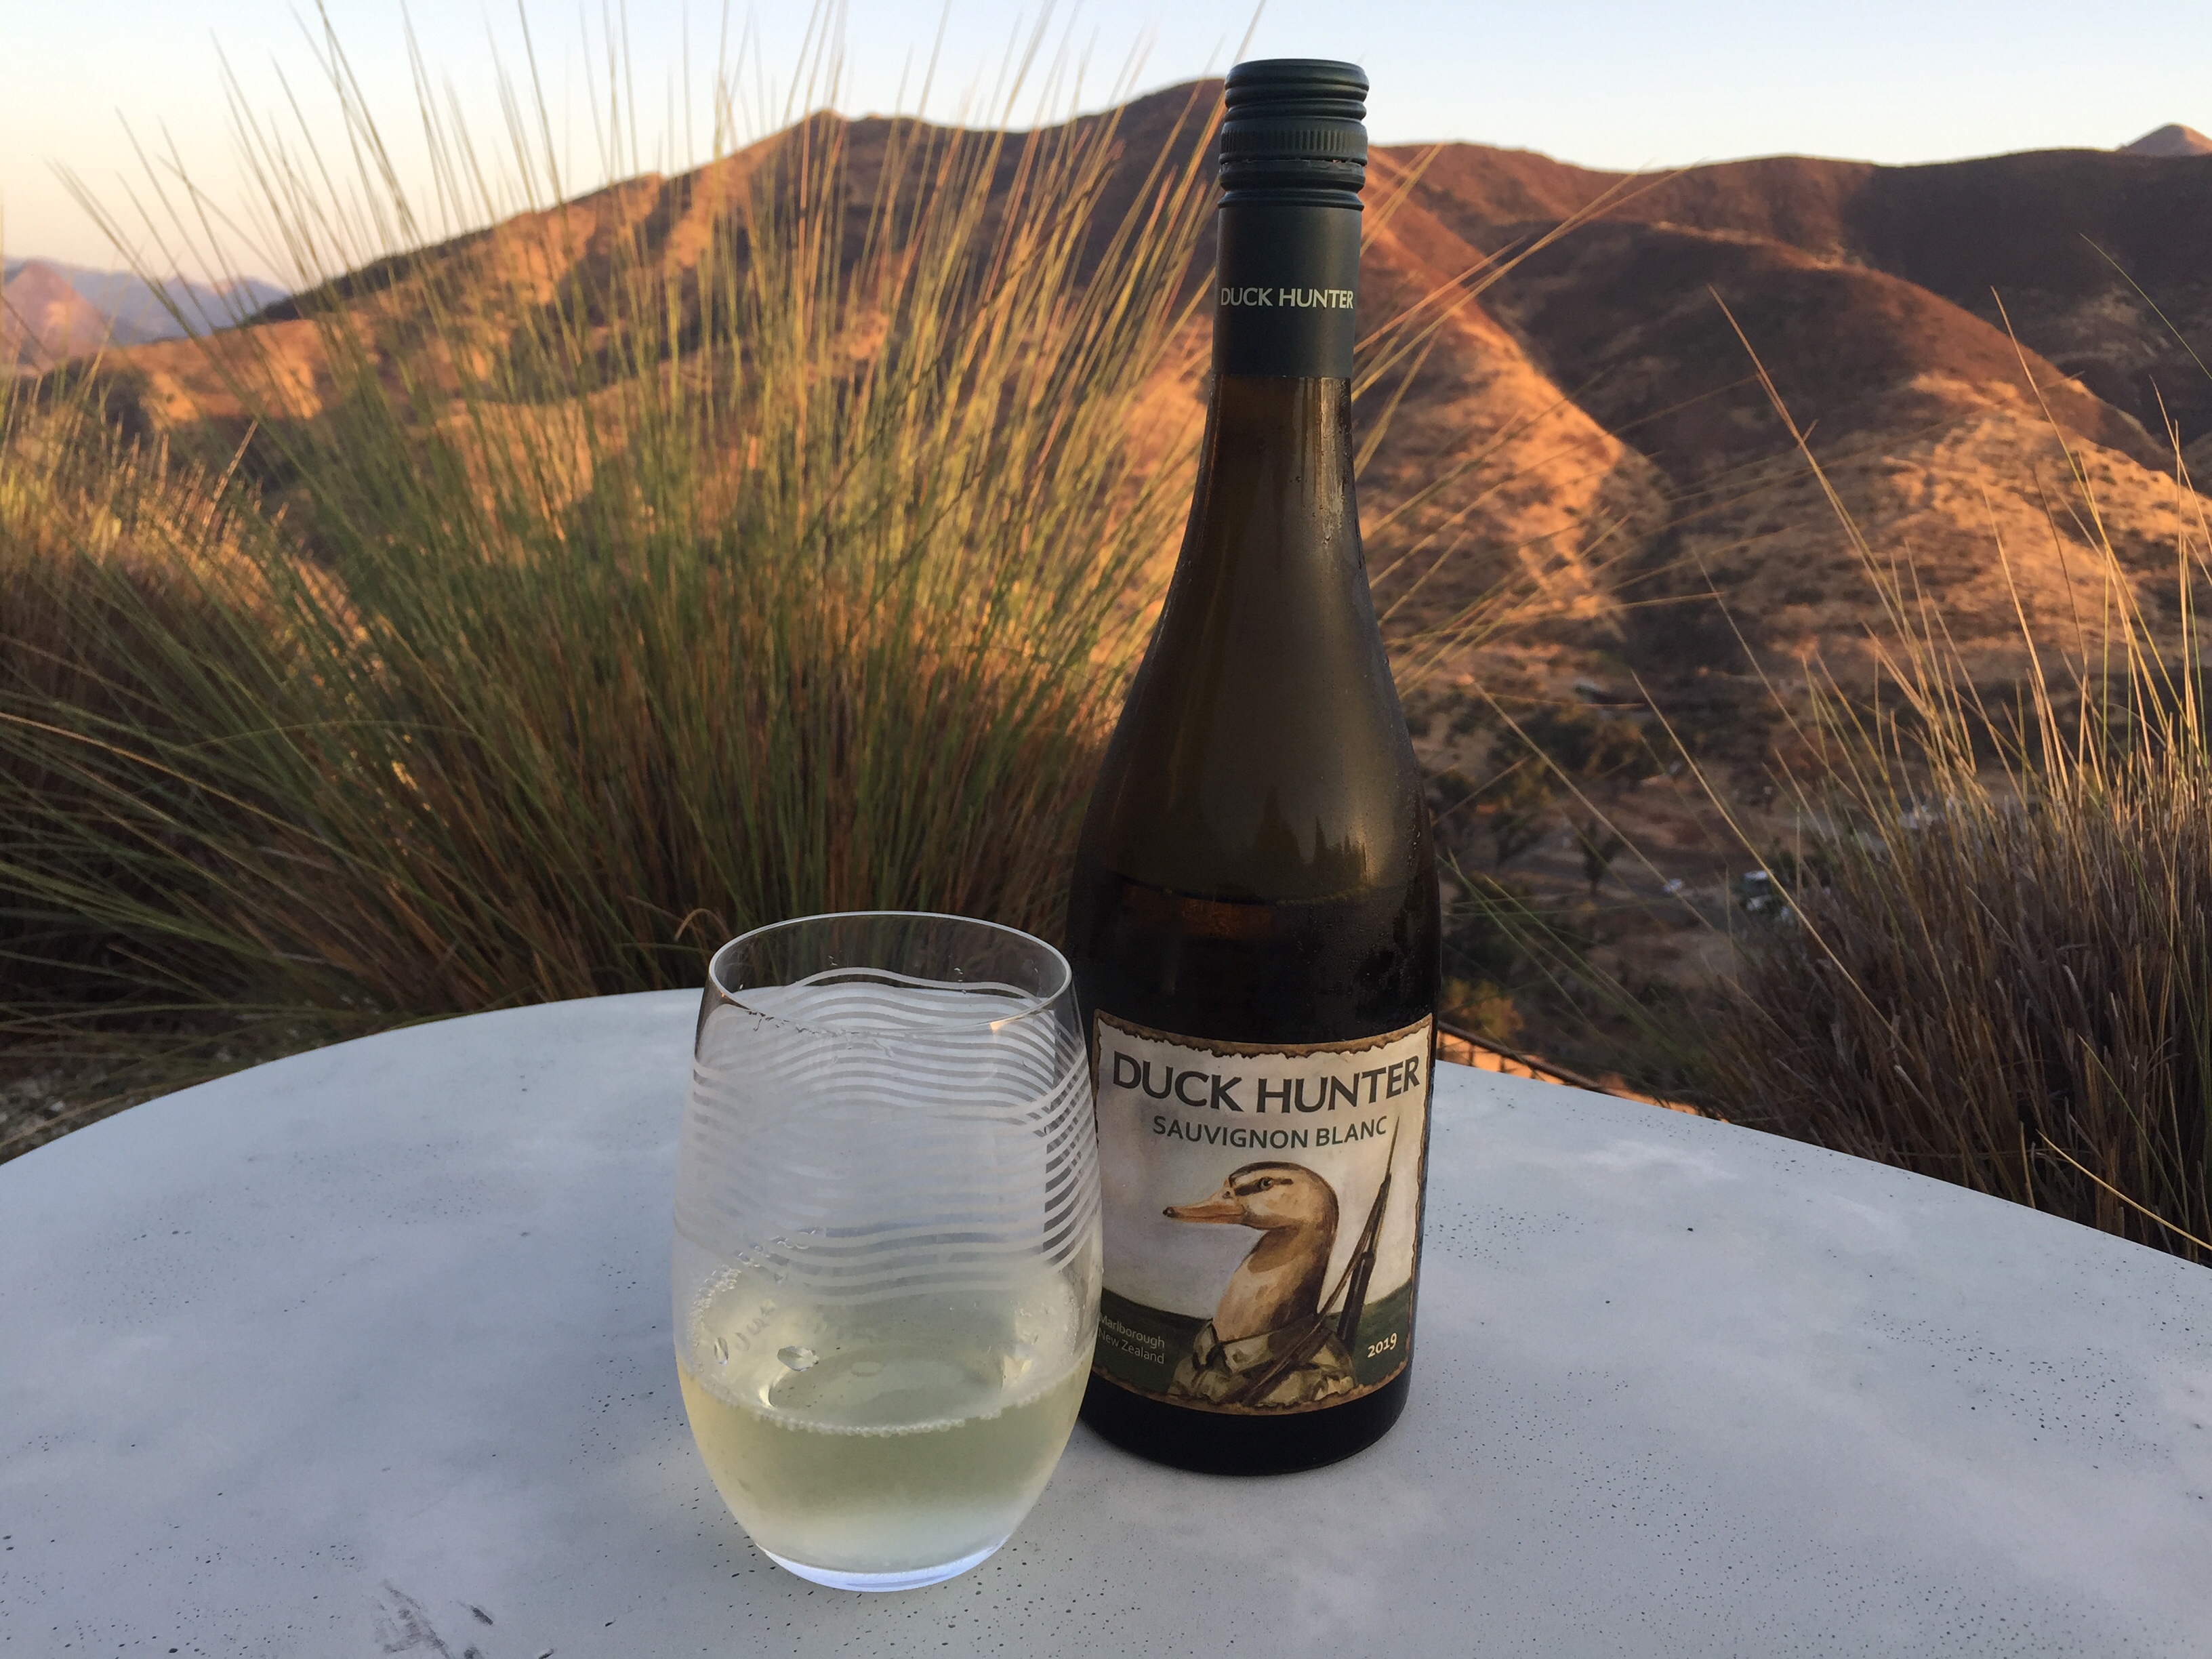 Bottle and glass of Duck Hunter 2019 Sauvignon Blanc from Costco